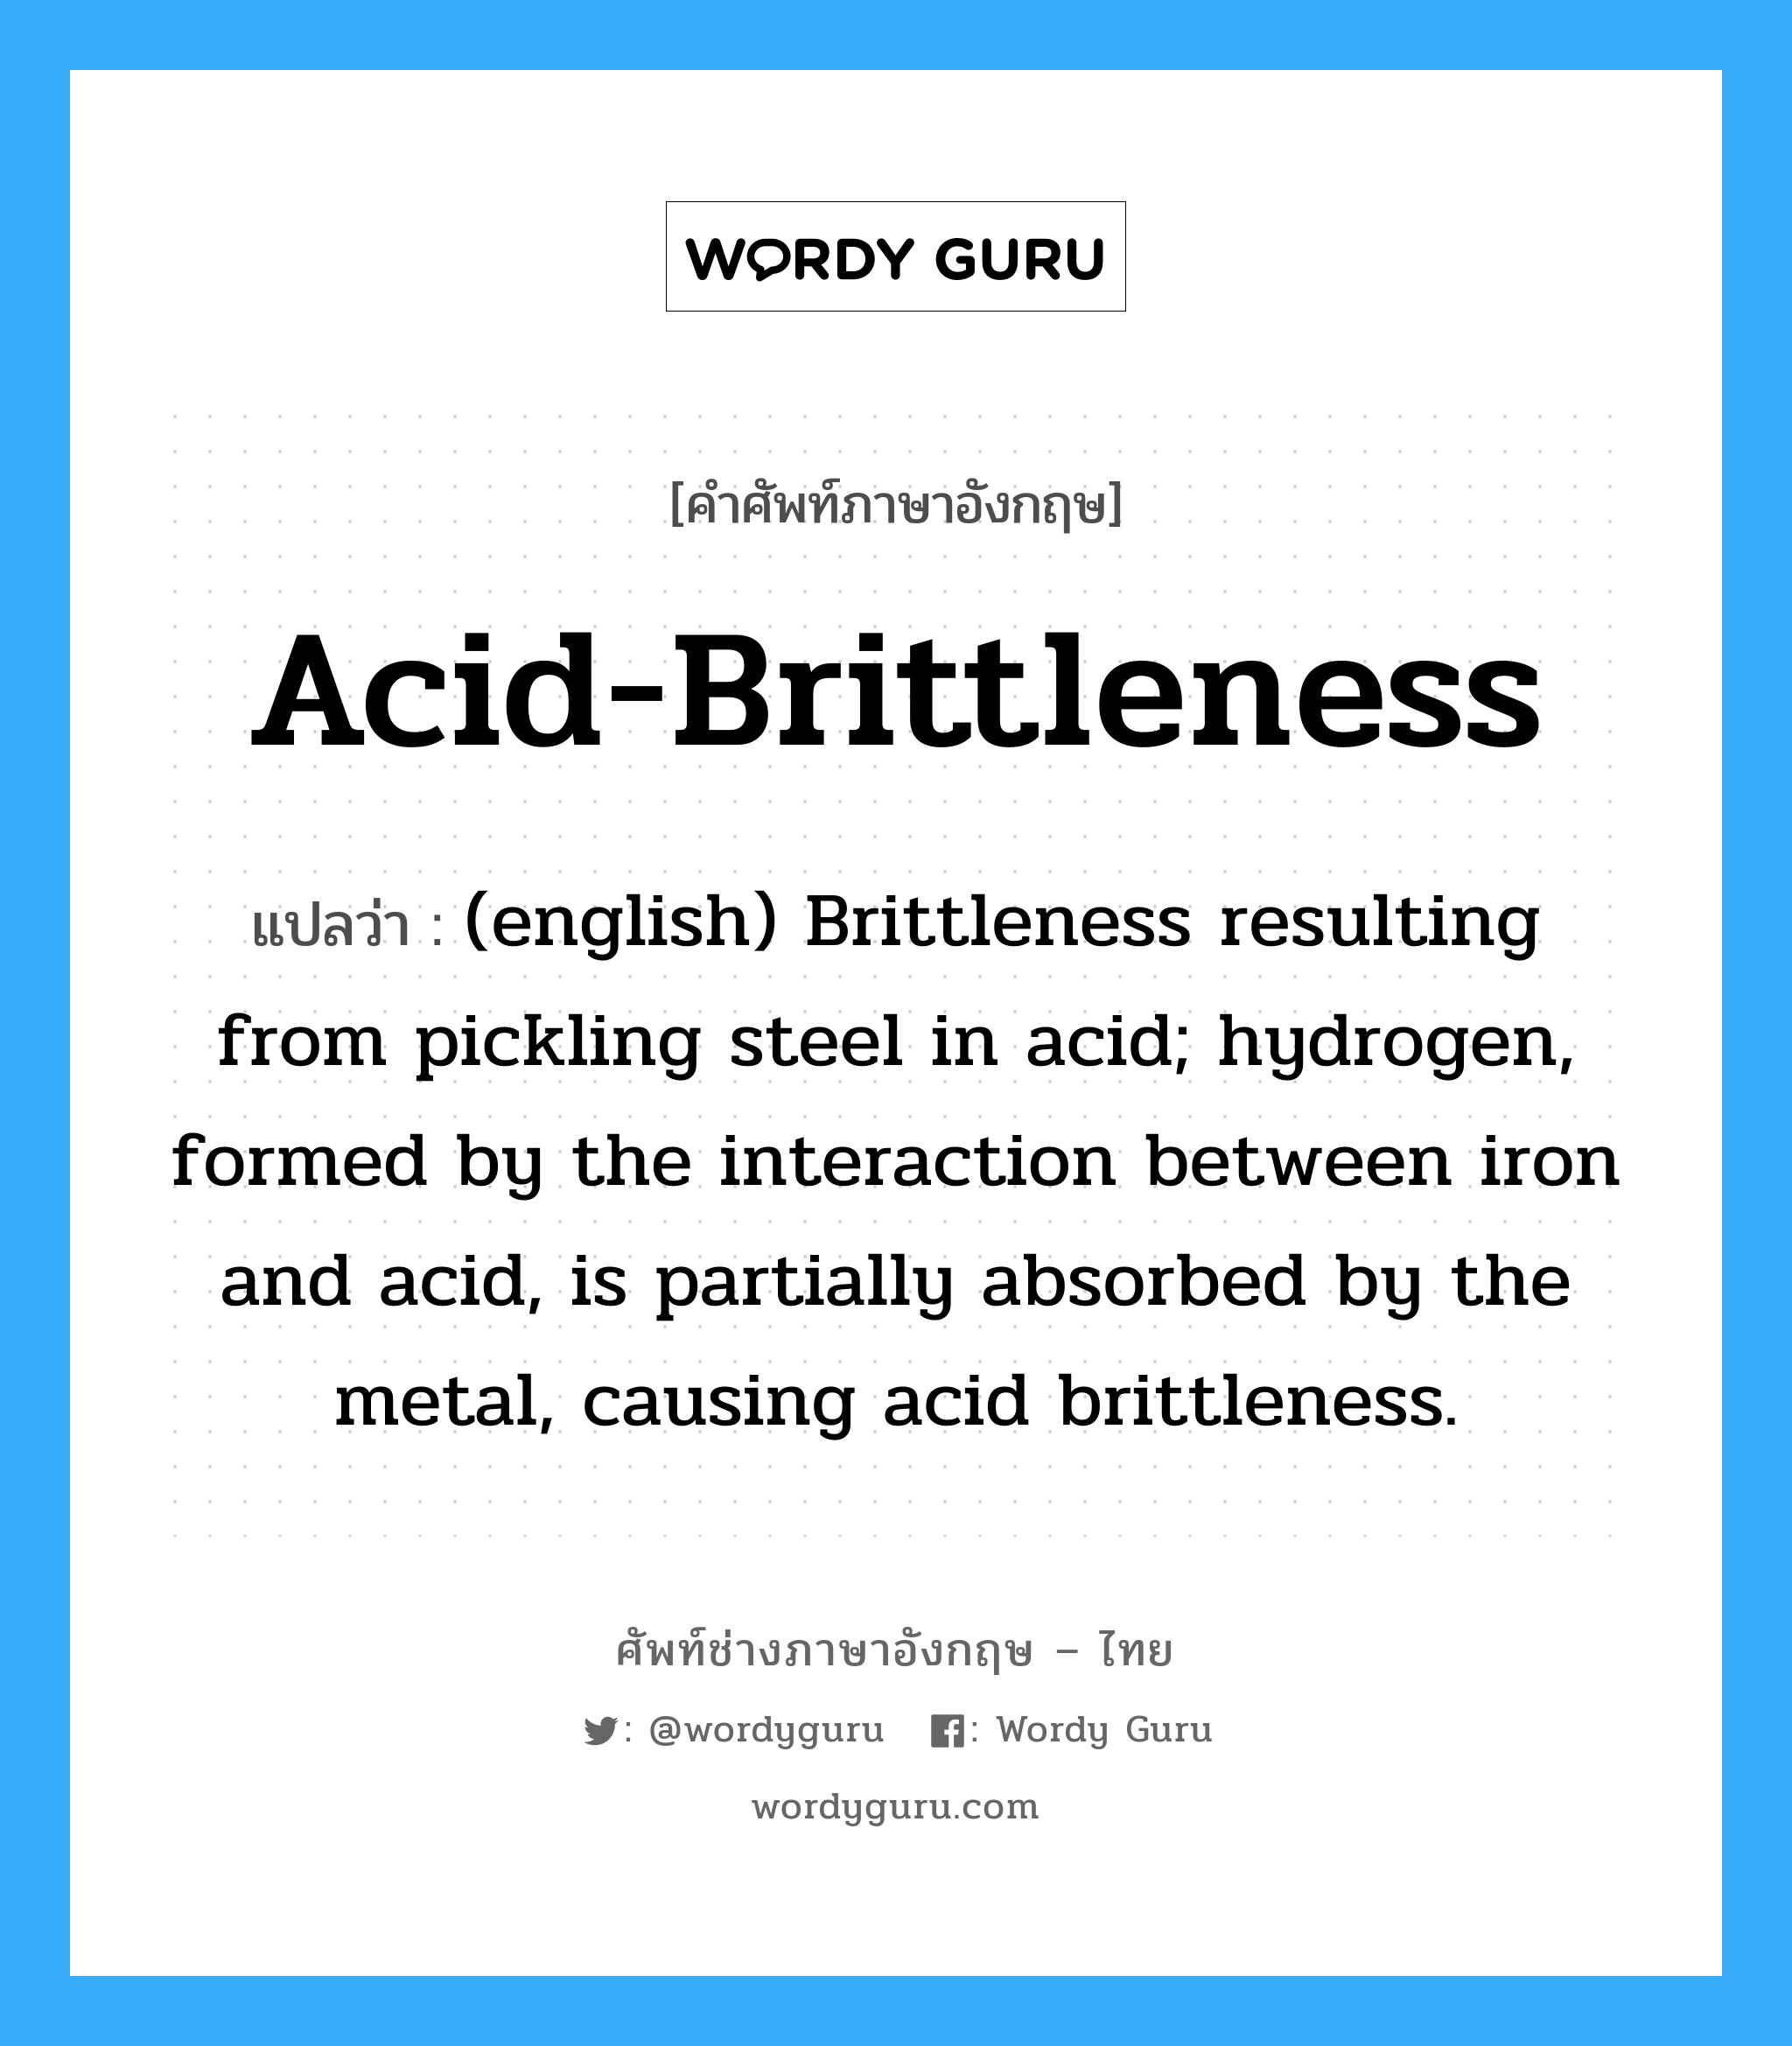 (english) Brittleness resulting from pickling steel in acid; hydrogen, formed by the interaction between iron and acid, is partially absorbed by the metal, causing acid brittleness. ภาษาอังกฤษ?, คำศัพท์ช่างภาษาอังกฤษ - ไทย (english) Brittleness resulting from pickling steel in acid; hydrogen, formed by the interaction between iron and acid, is partially absorbed by the metal, causing acid brittleness. คำศัพท์ภาษาอังกฤษ (english) Brittleness resulting from pickling steel in acid; hydrogen, formed by the interaction between iron and acid, is partially absorbed by the metal, causing acid brittleness. แปลว่า Acid-Brittleness